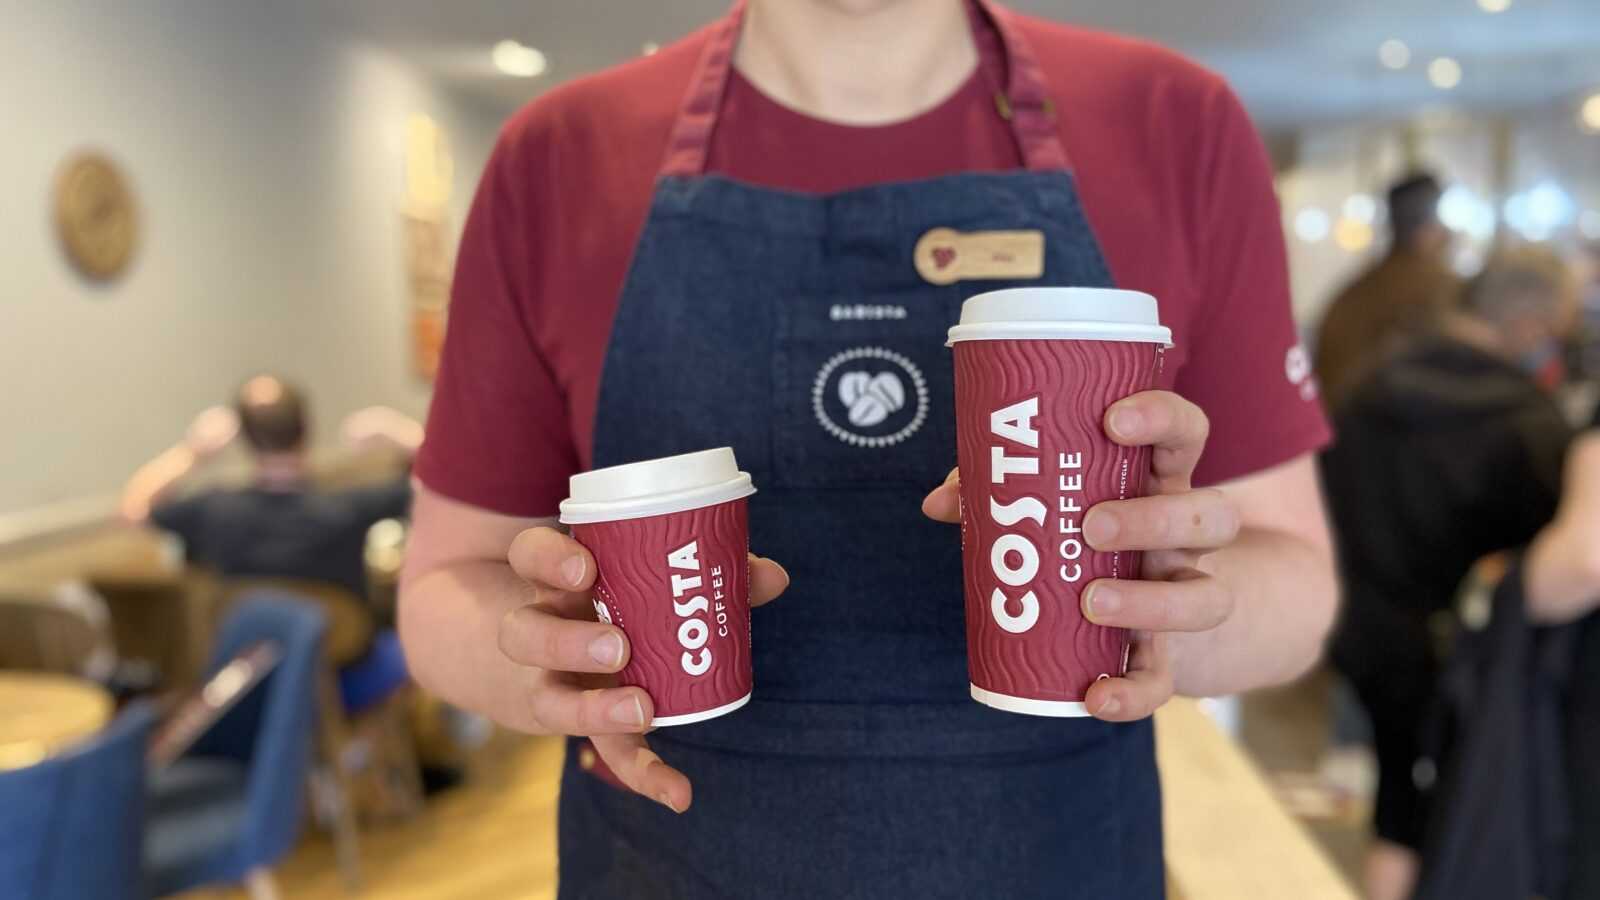 Costa Coffee introduces new Mini cup size, expands value meal deal